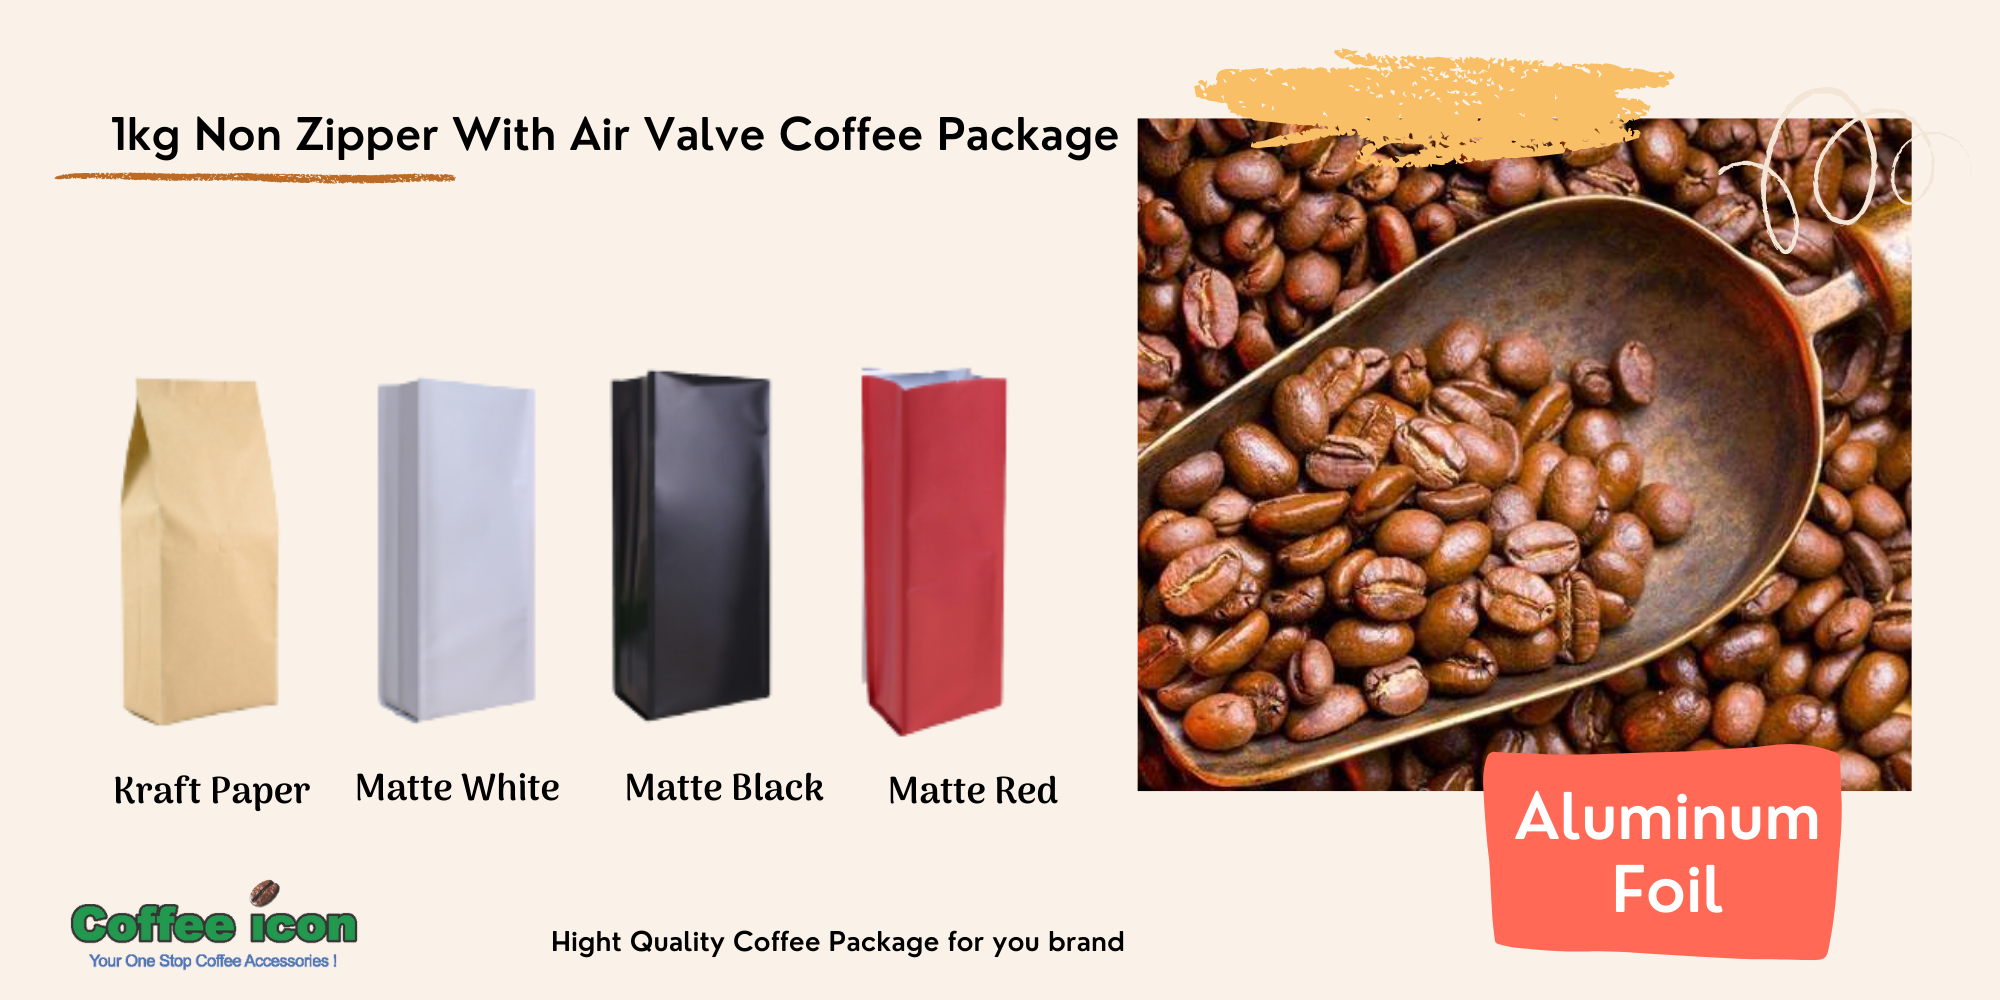 1kg non zipper coffee package with air valve.png